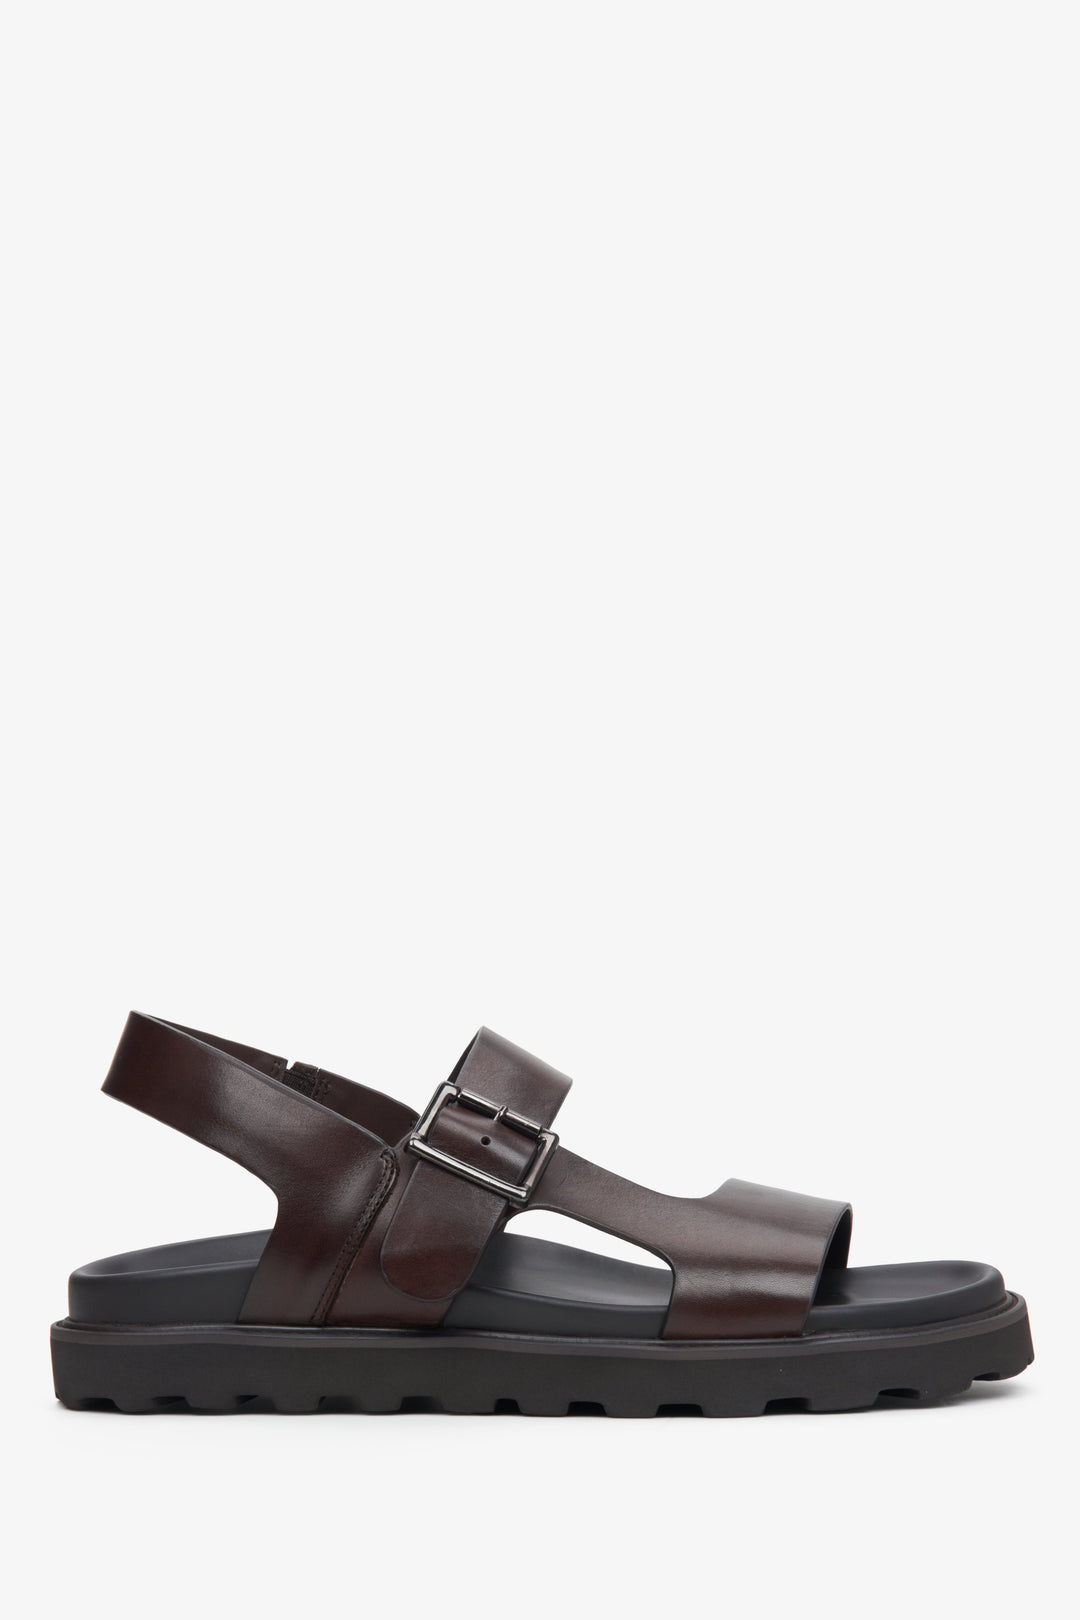 Men's Brown Leather Sandals with Buckle Estro ER00113325